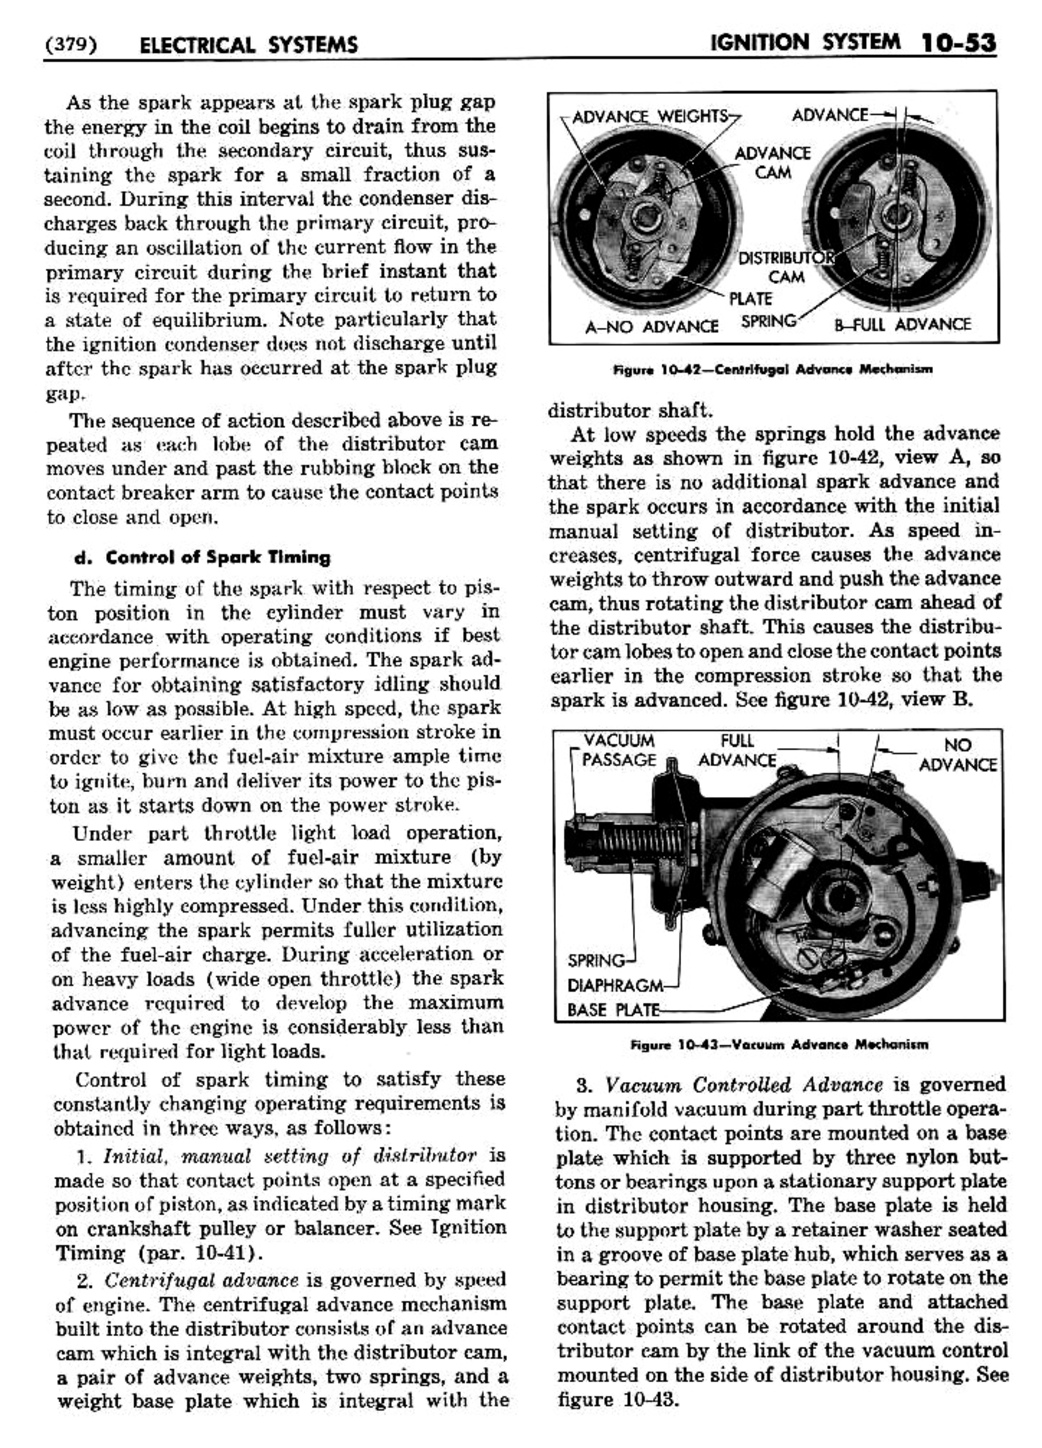 n_11 1956 Buick Shop Manual - Electrical Systems-053-053.jpg